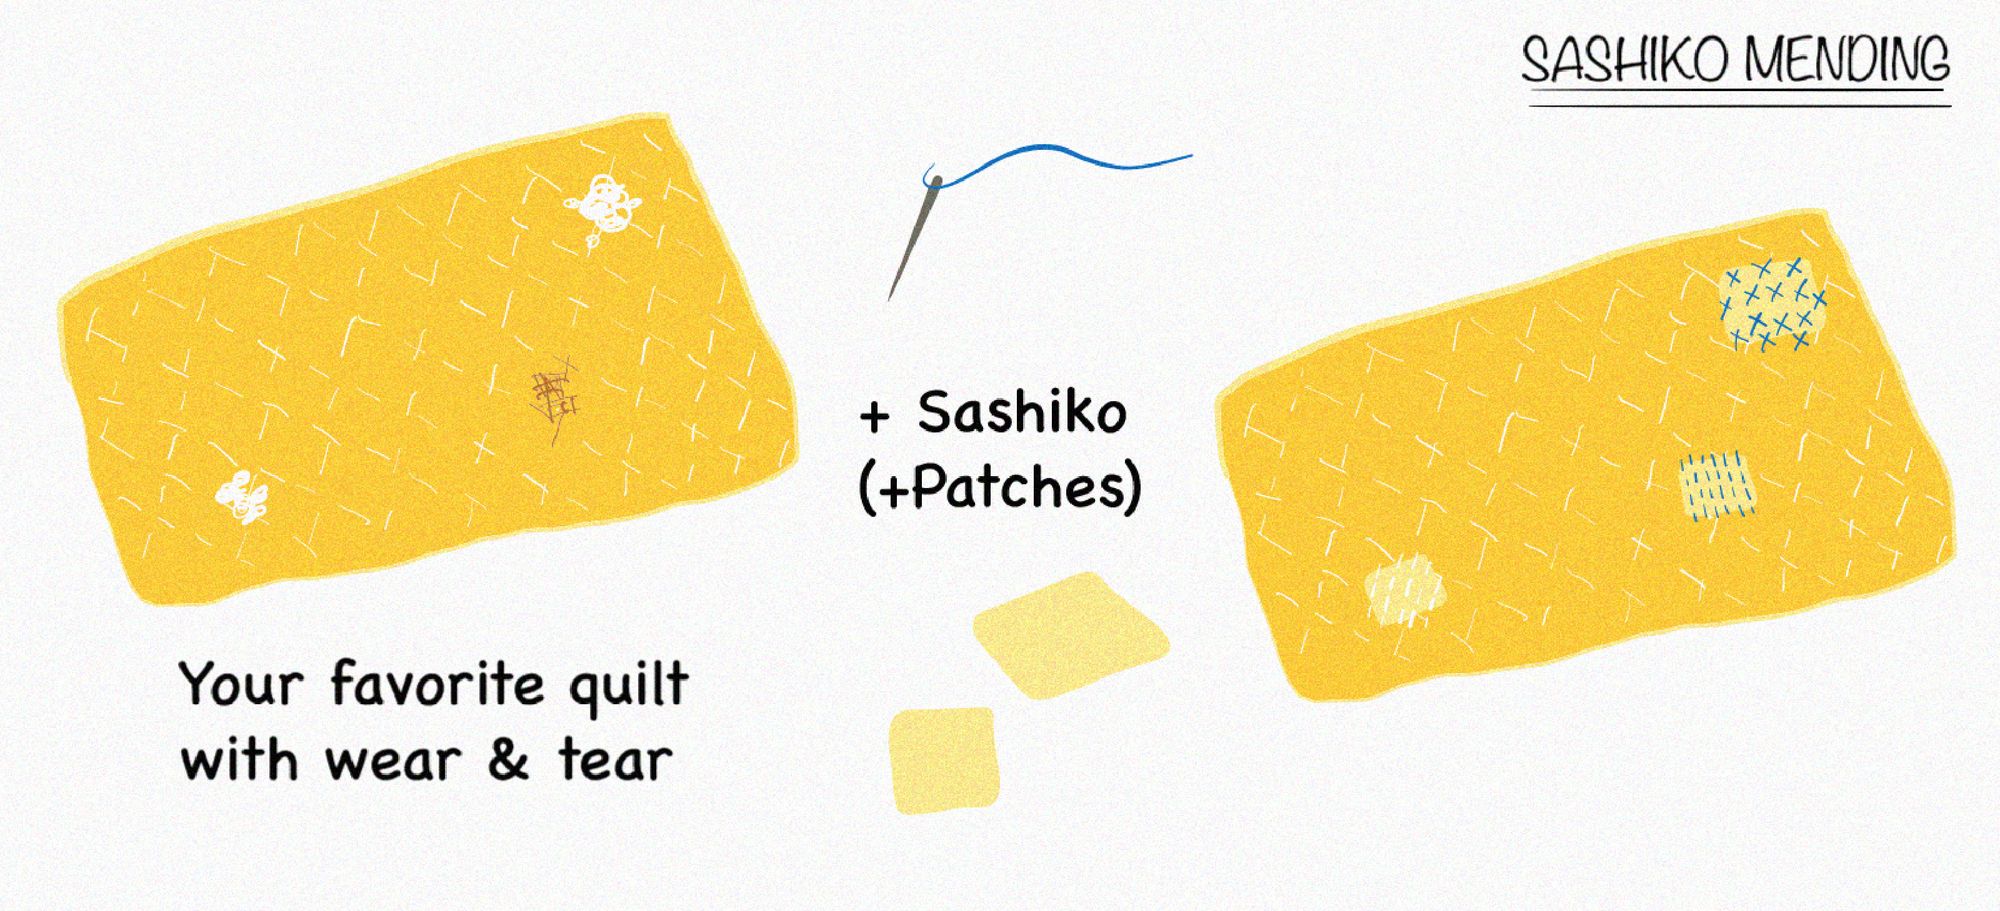 Instructions on how to mend a quilt with sashiko.